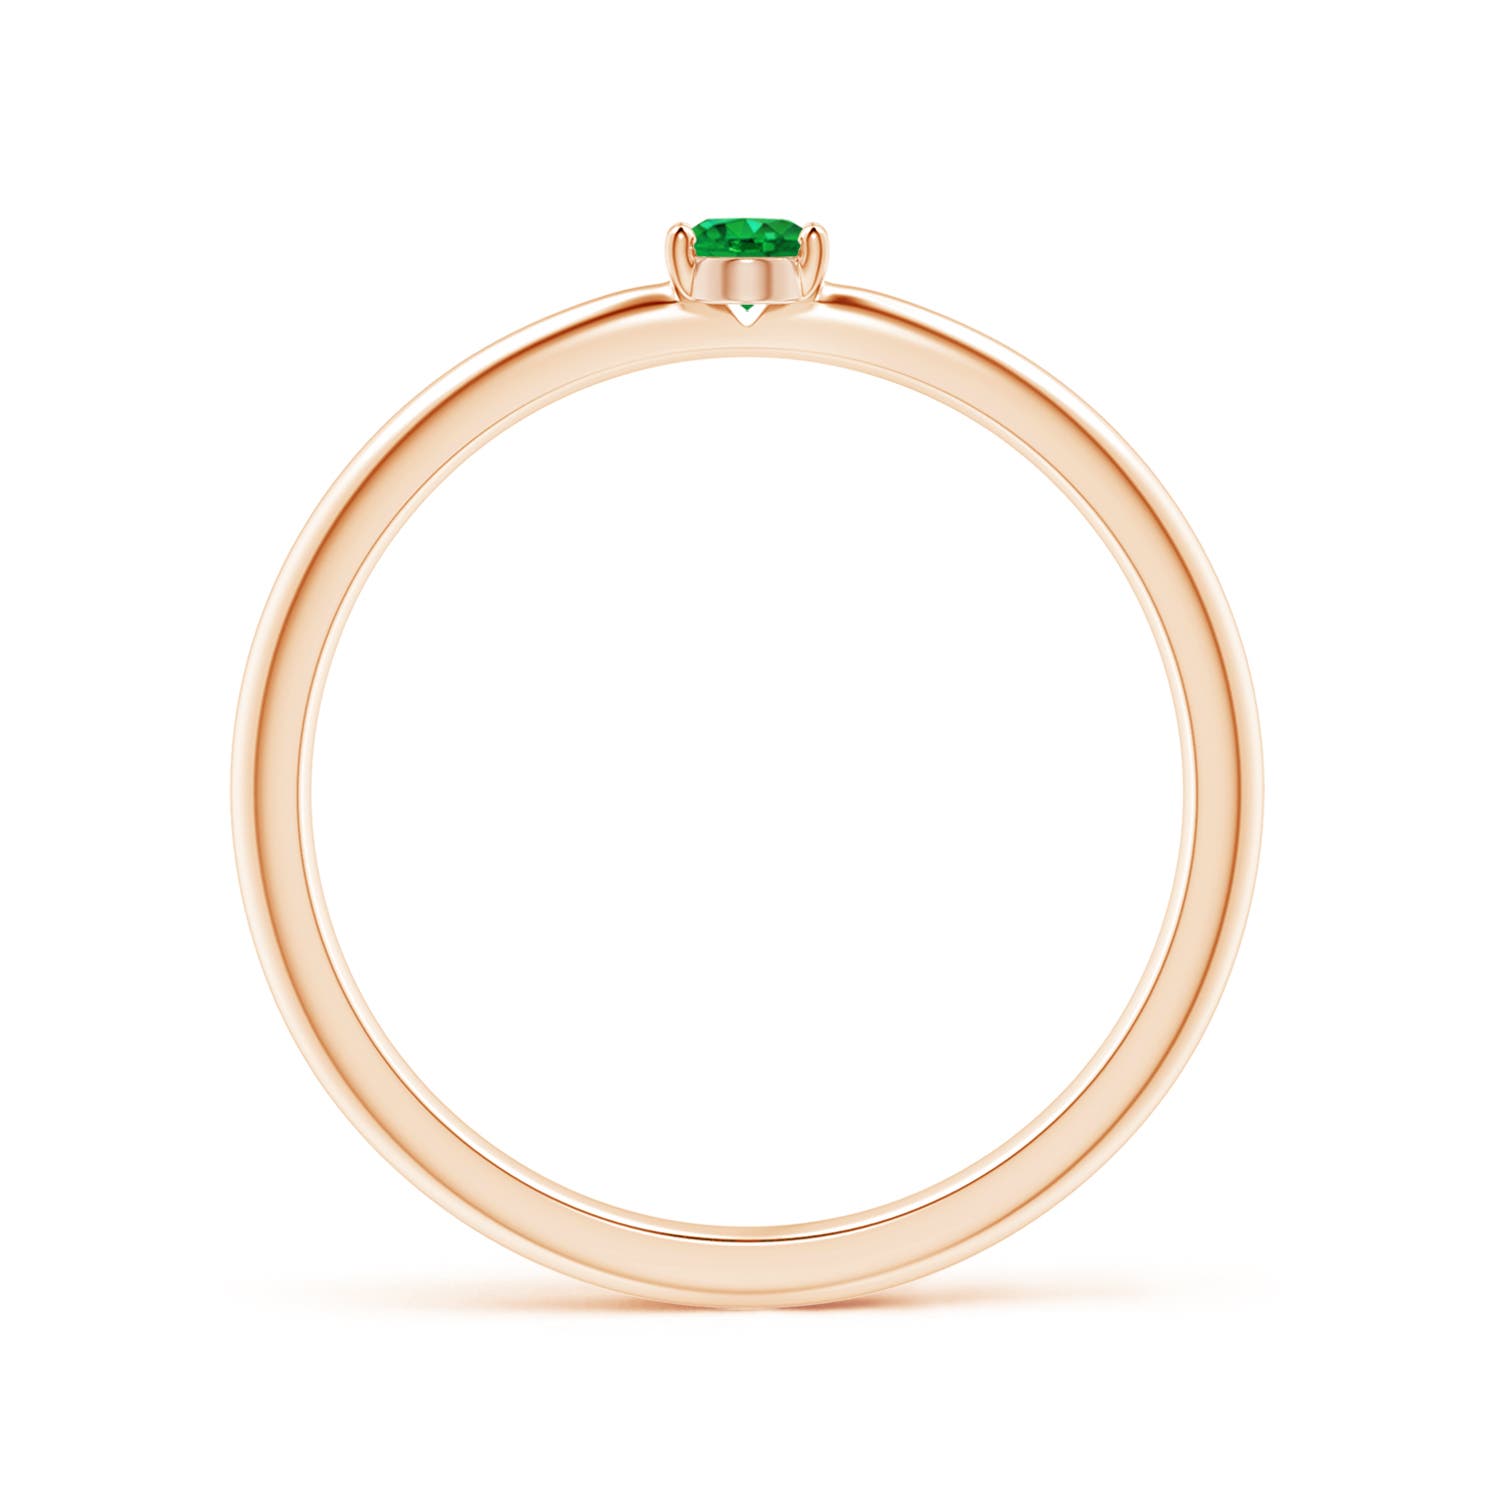 AAA - Emerald / 0.12 CT / 14 KT Rose Gold